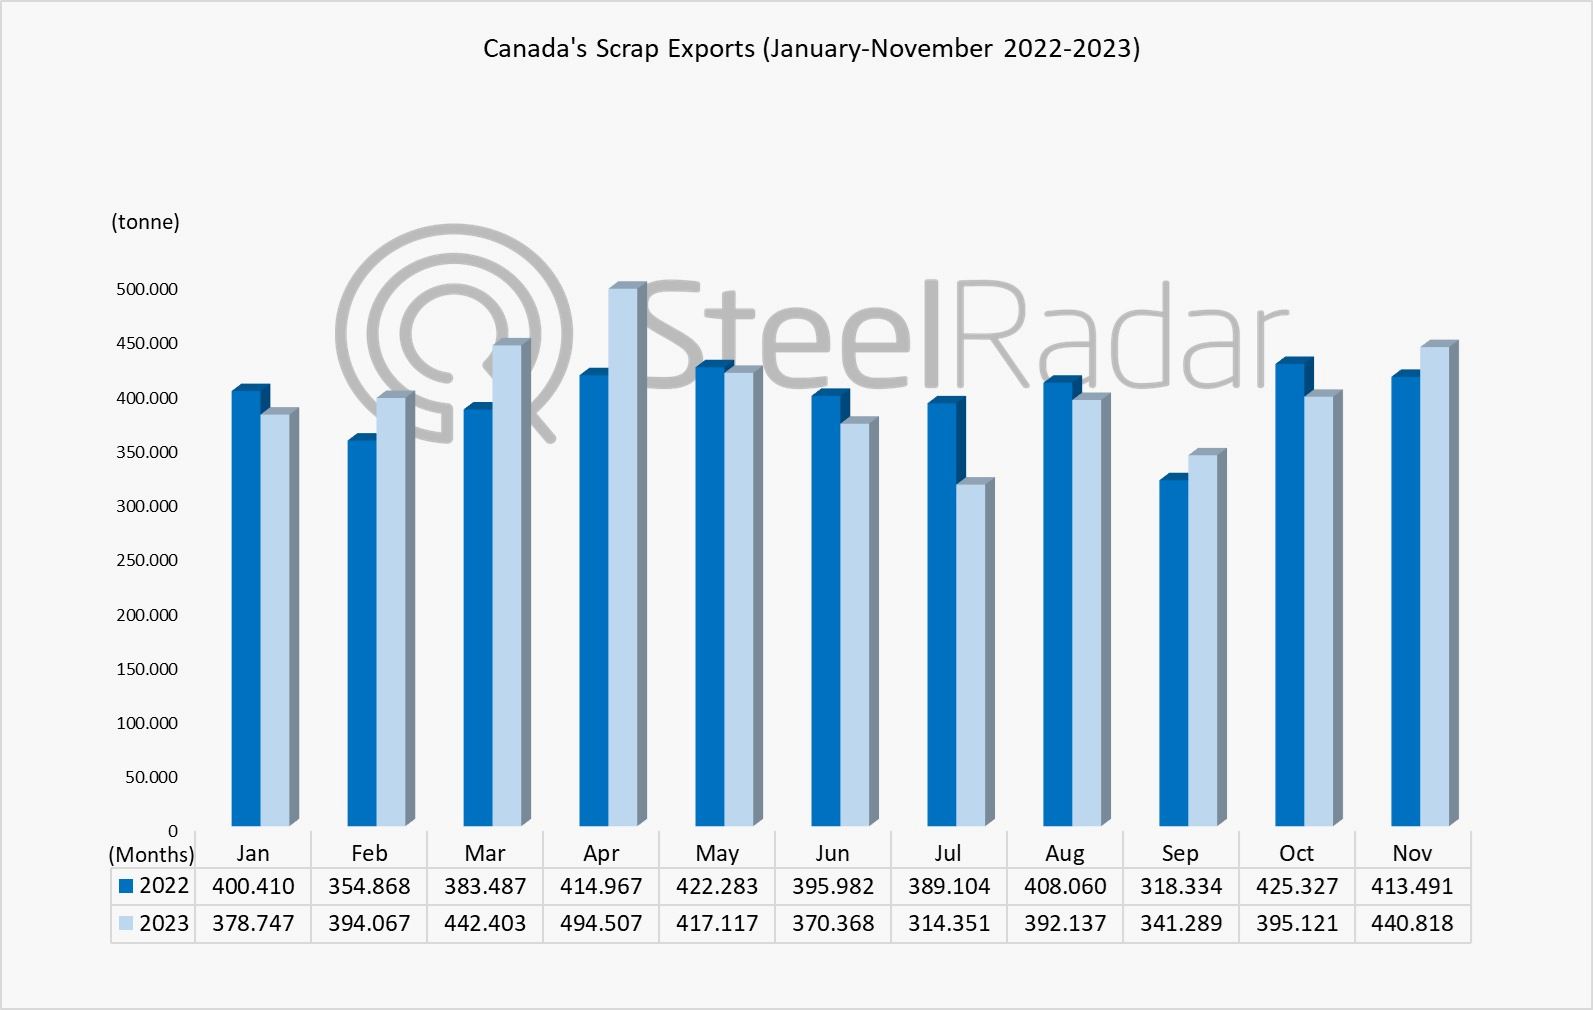  USA ranks first in Canada's scrap exports!